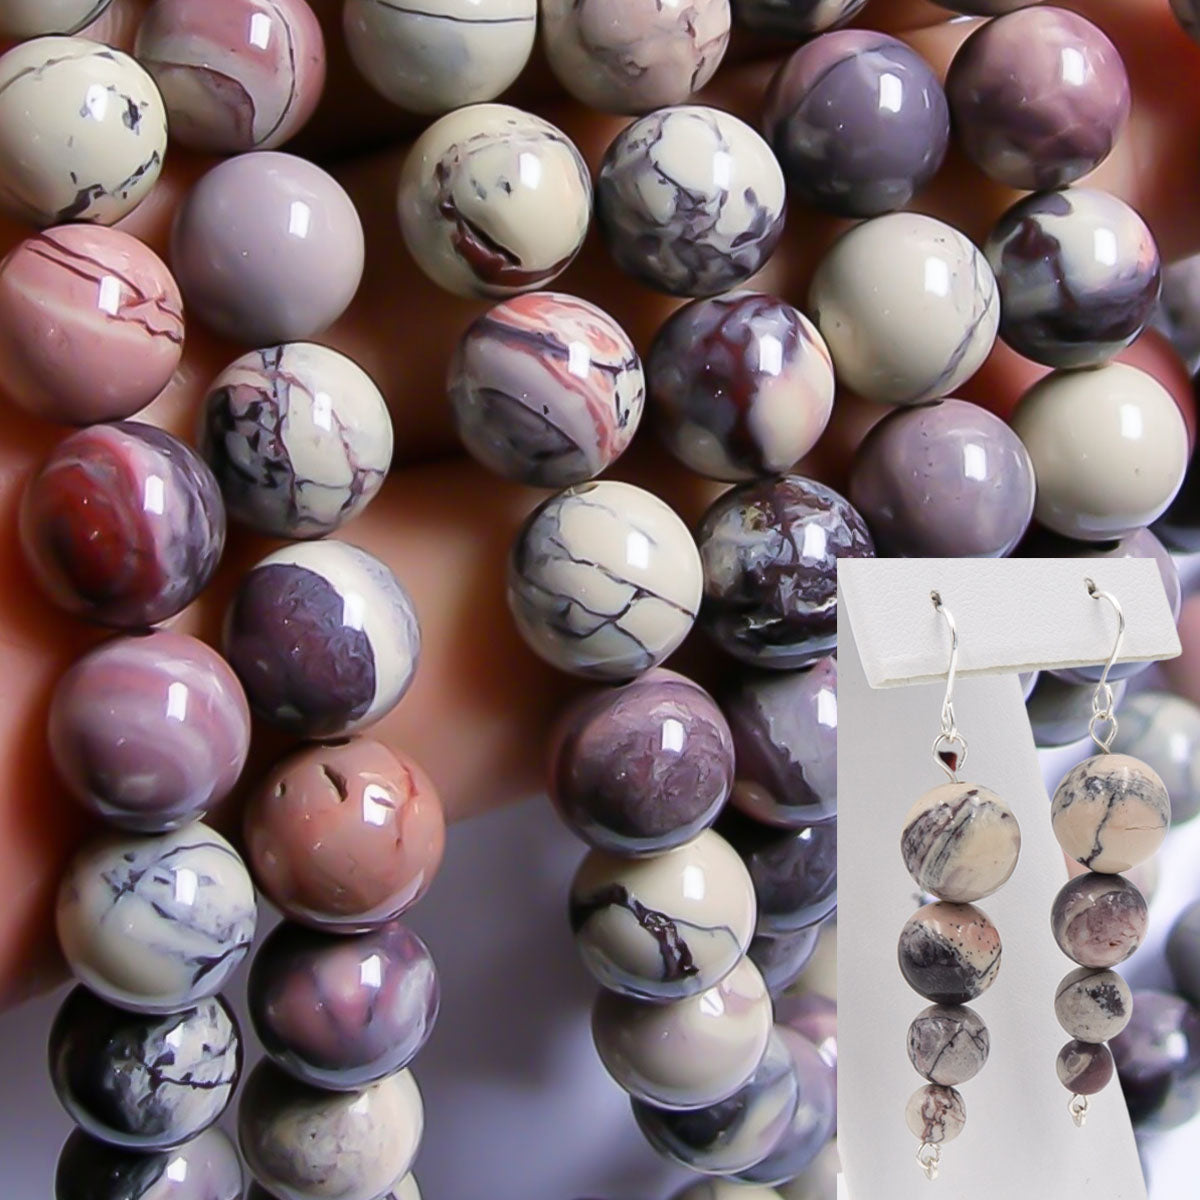 Earth Song Jewelry - Porcelain Jasper - The many beautiful colors of this gemstone! with my earrings